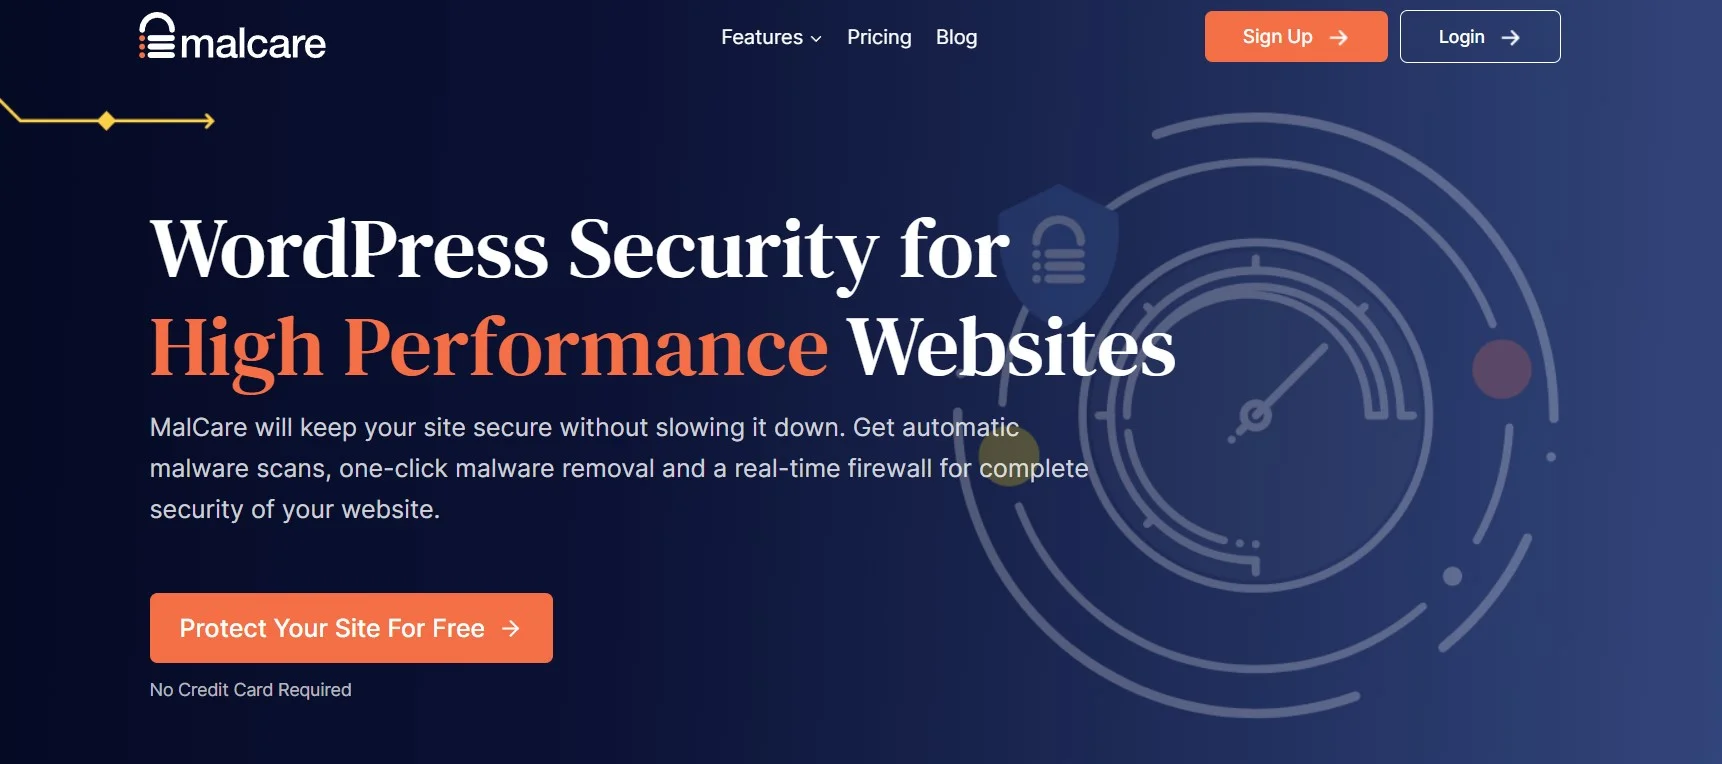 Malcare Malware Removal Plugin Offers Real-Time Scanning And Automatic Malware Removal To Protect Your Website From Hackers And Malicious Attacks.webp